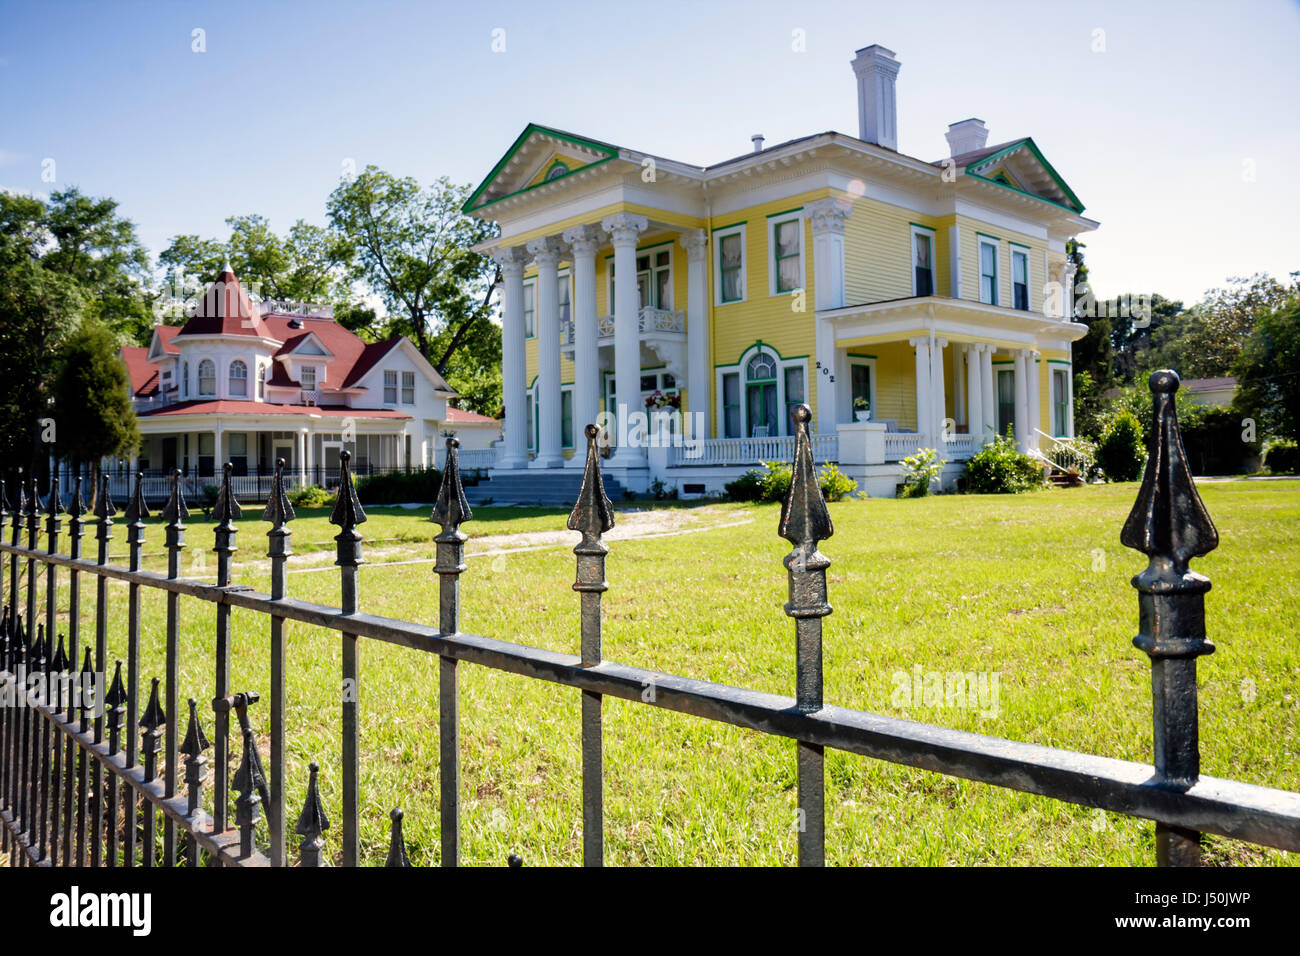 Alabama,Bullock County,Union Springs,casa storica,Powell Street,preservation,Rainer Lewis house,houses,1904,Neo Classical Revival,portico,Corinthian Foto Stock